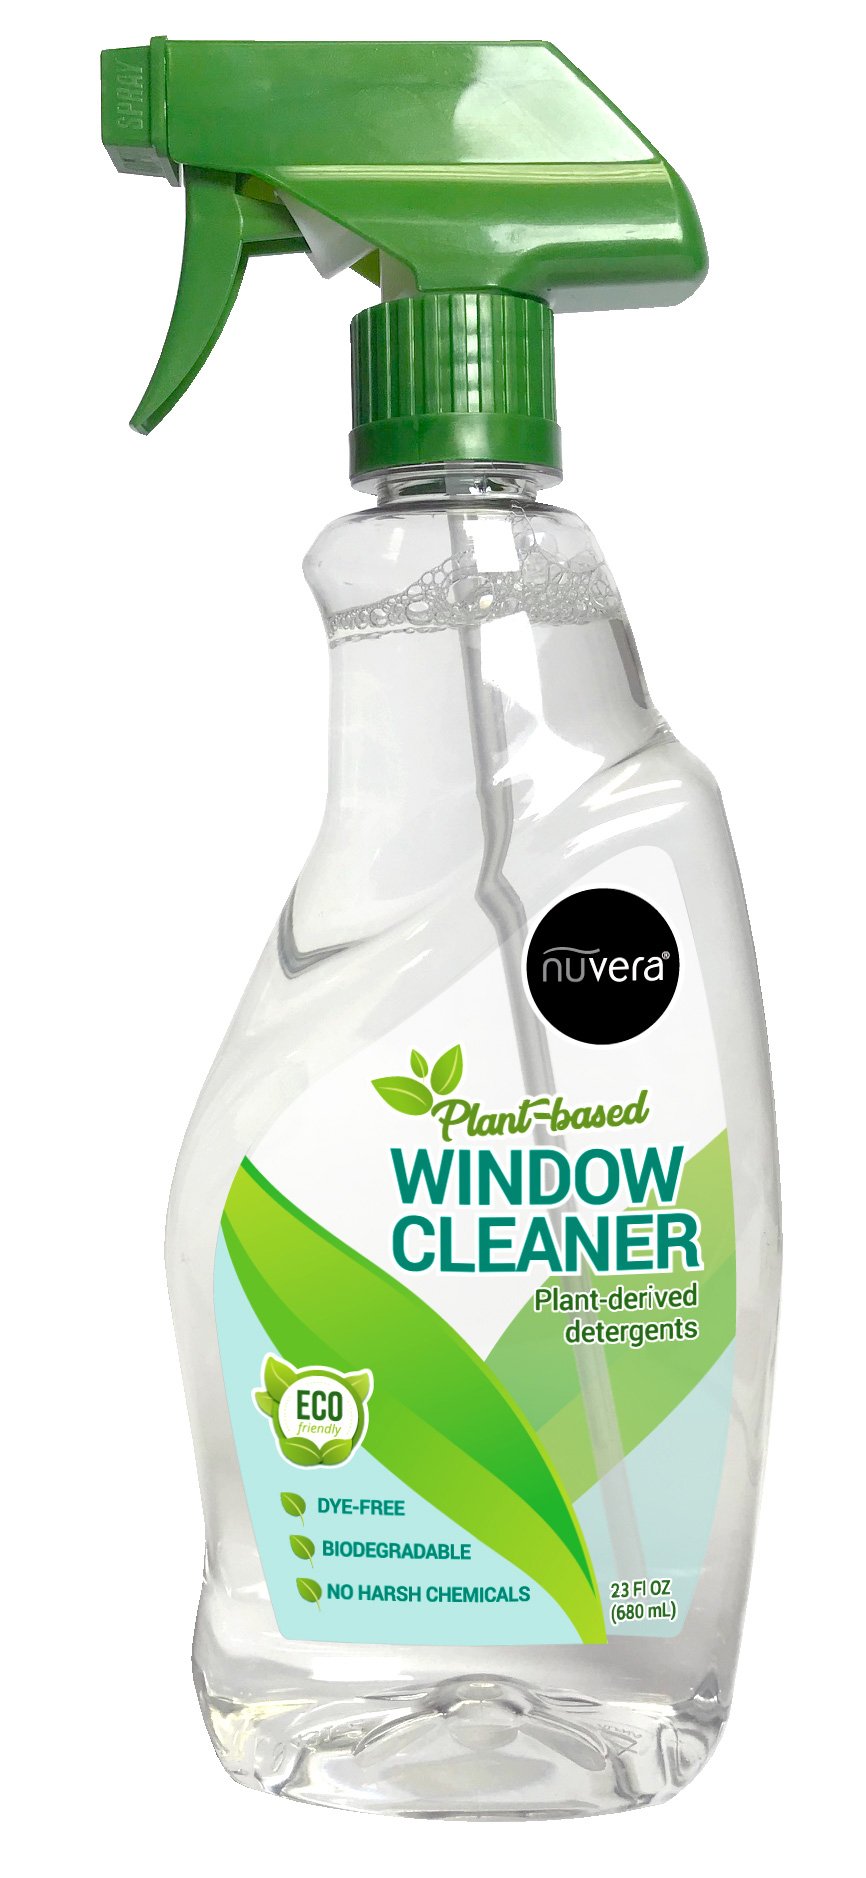 ÁTHOS Glass cleaner is plant-based, non-toxic and ALWAYS leaves a stea